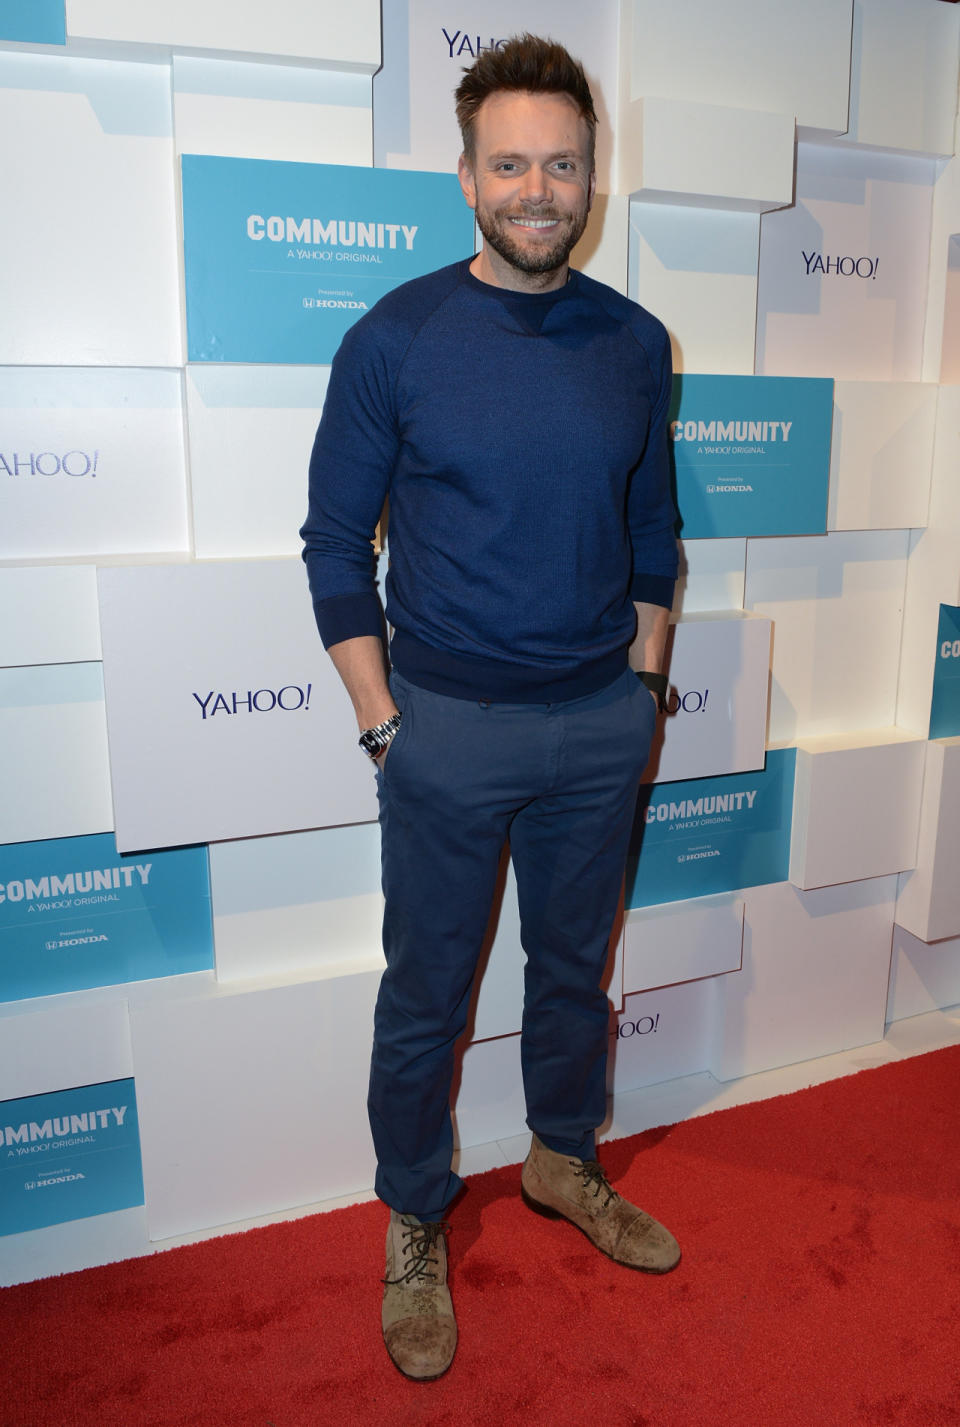 “Community” actor Joel McHale must follow fashion as he’s pulling off trendy monochrome like a boss. His suede dessert boots are pretty on-point as well.